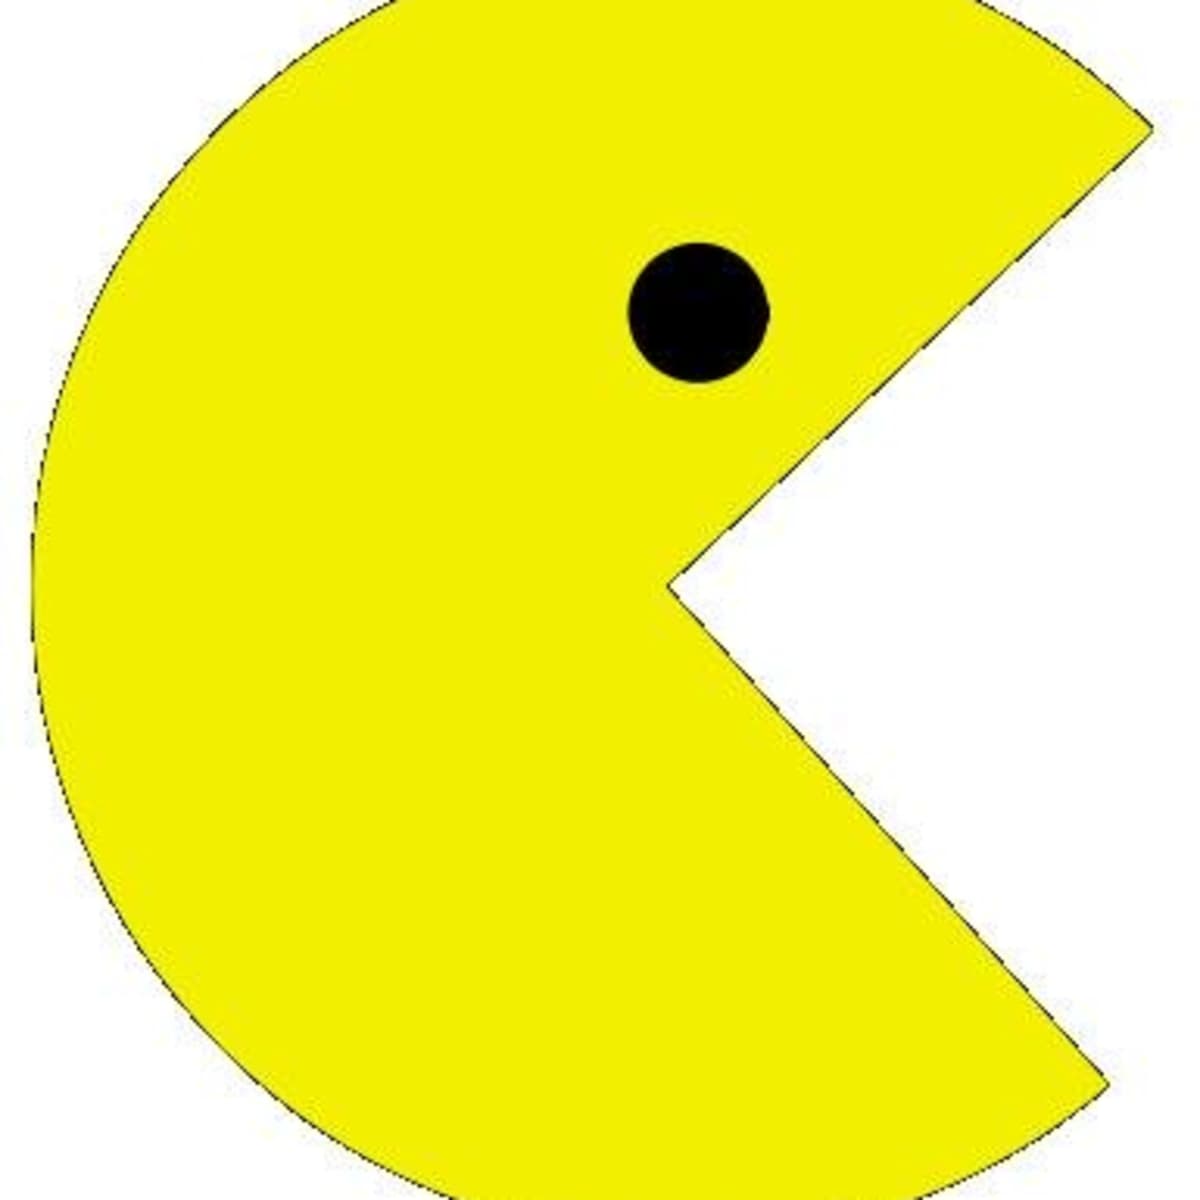 Pac-Man turns 40 - 8 facts about the famous video game character